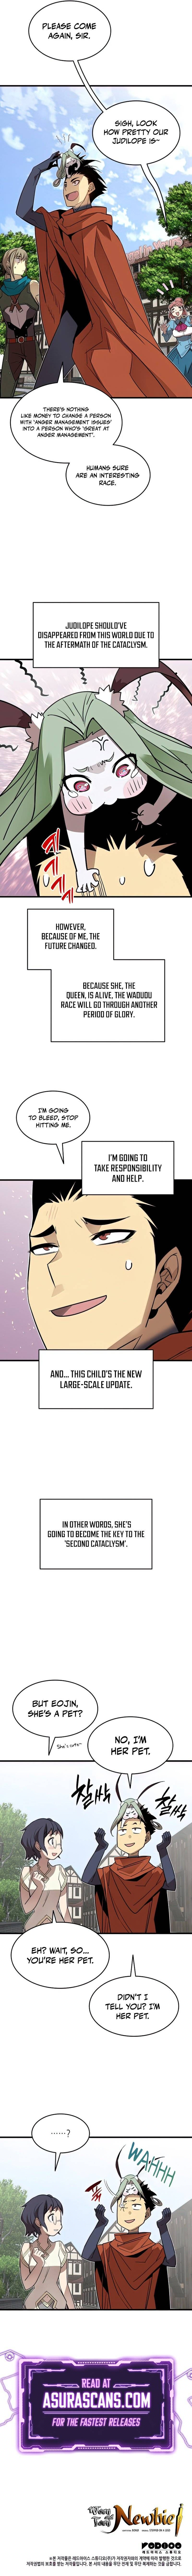 Worn and Torn Newbie Chapter 127 page 10 - MangaWeebs.in